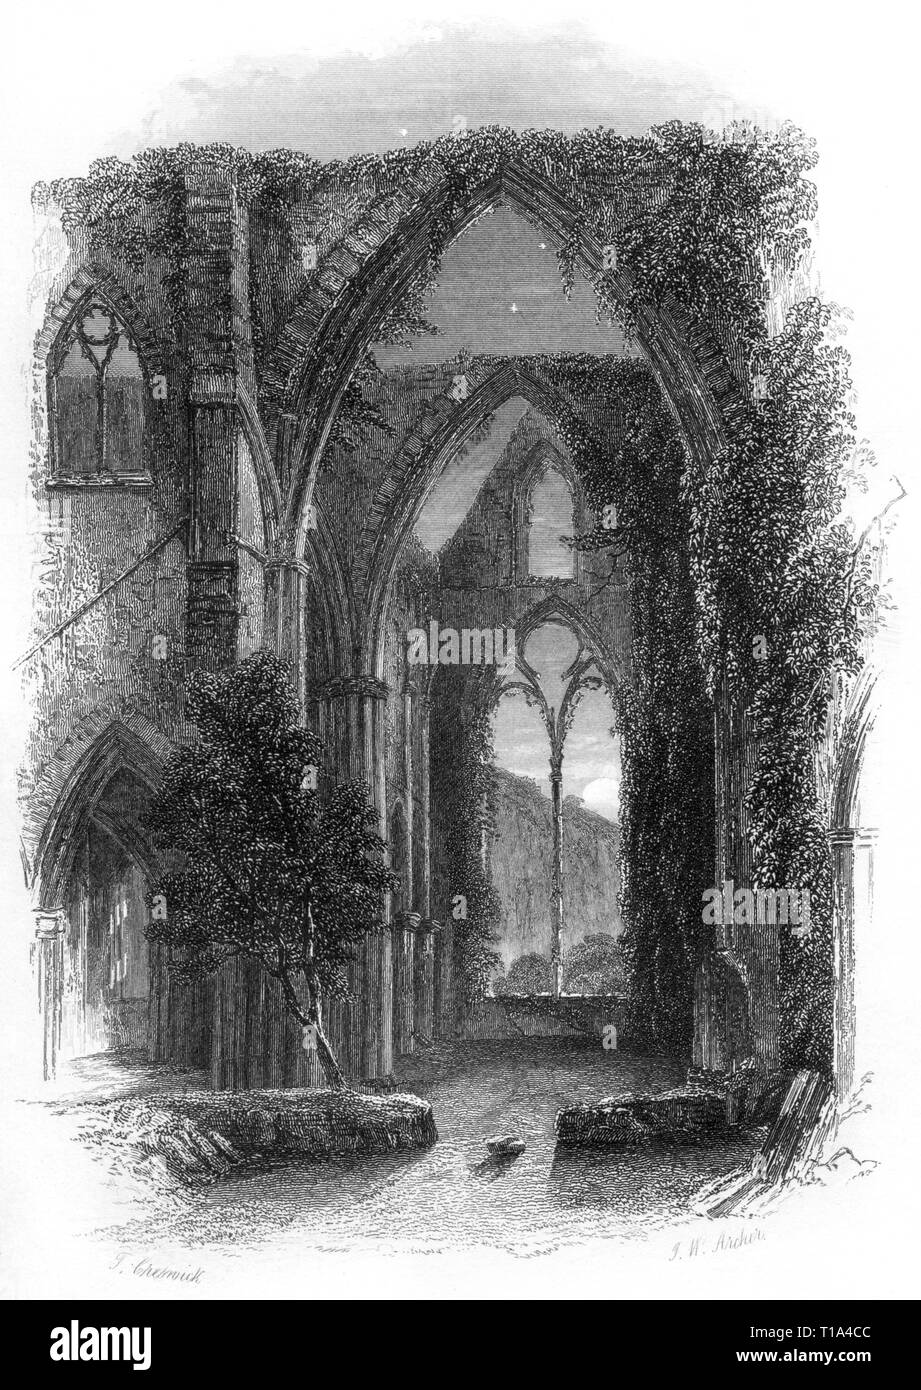 An engraving of Tintern Abbey, Monmouthshire, Wales UK scanned at high resolution from a book published in 1841. Believed copyright free. Stock Photo